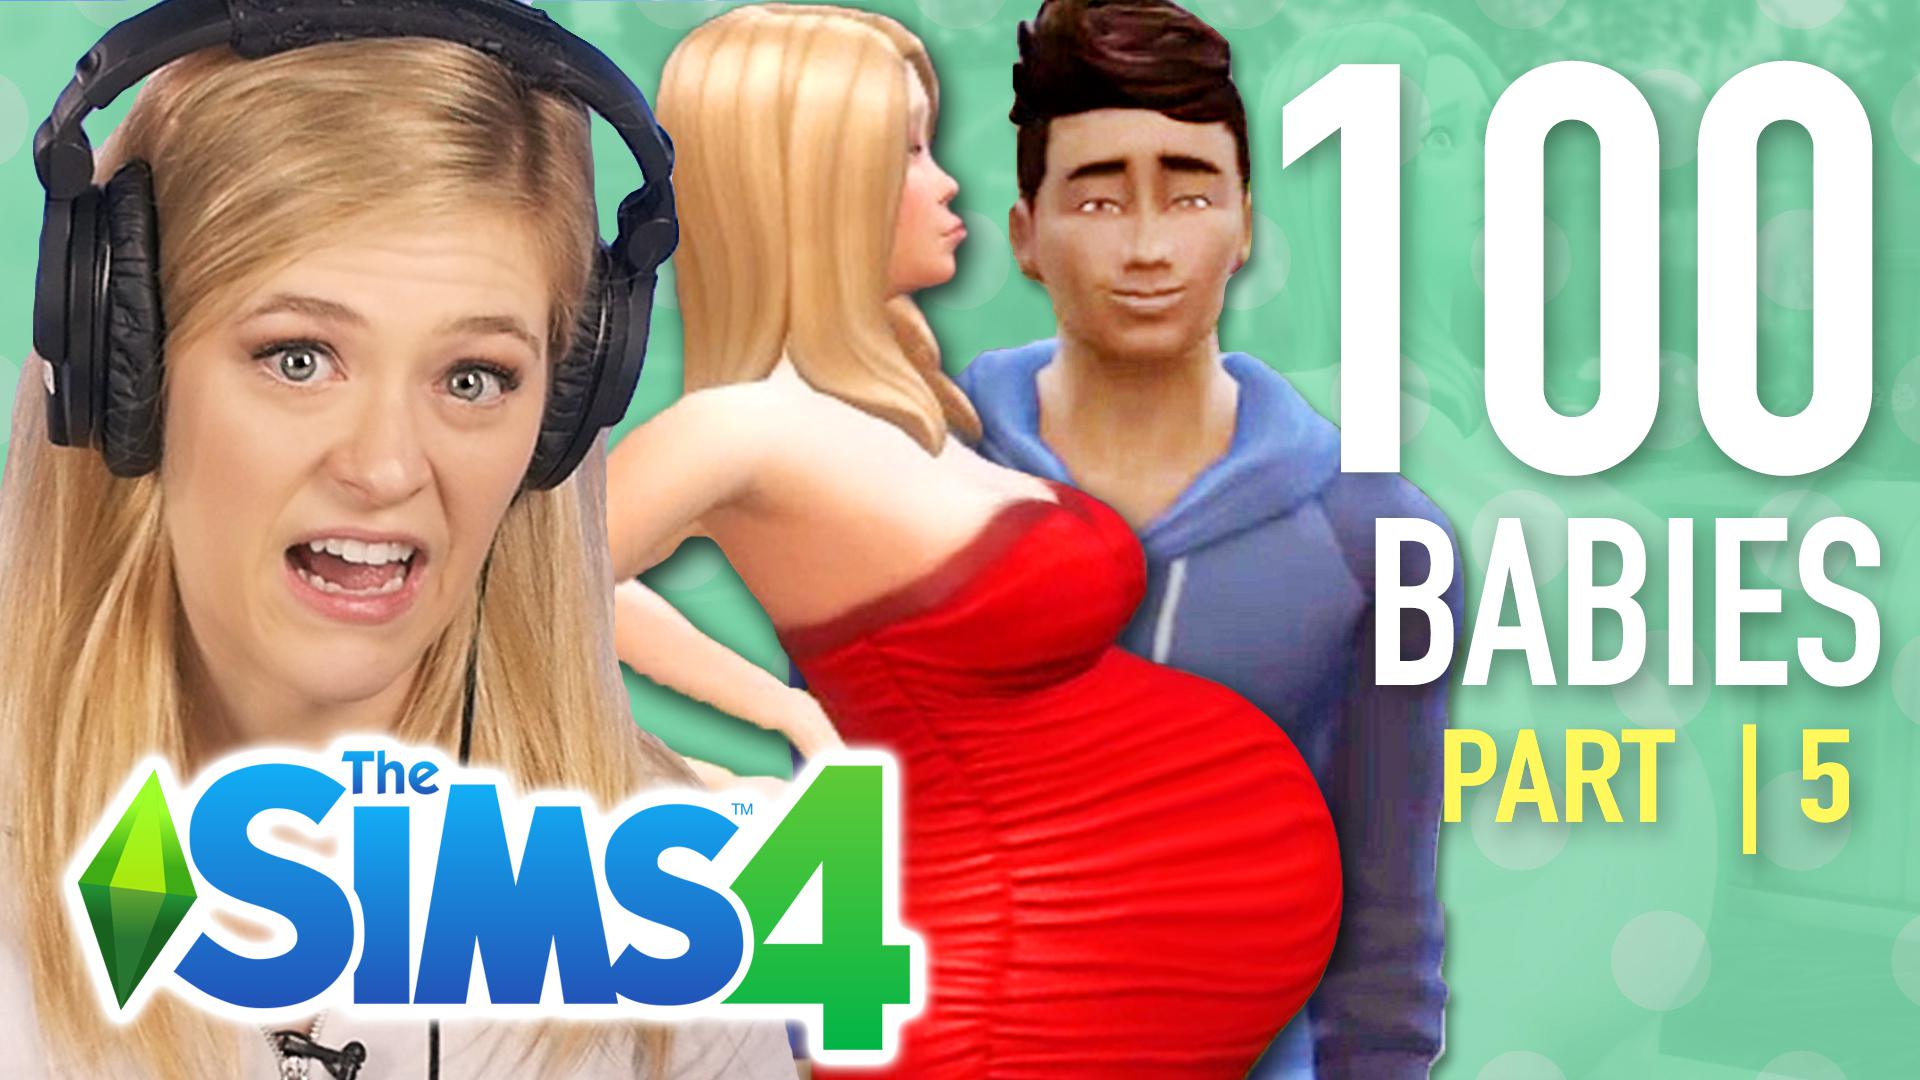 Buzzfeed Video Single Girl Tries The 100 Baby Challenge In The Sims 4 Part 5